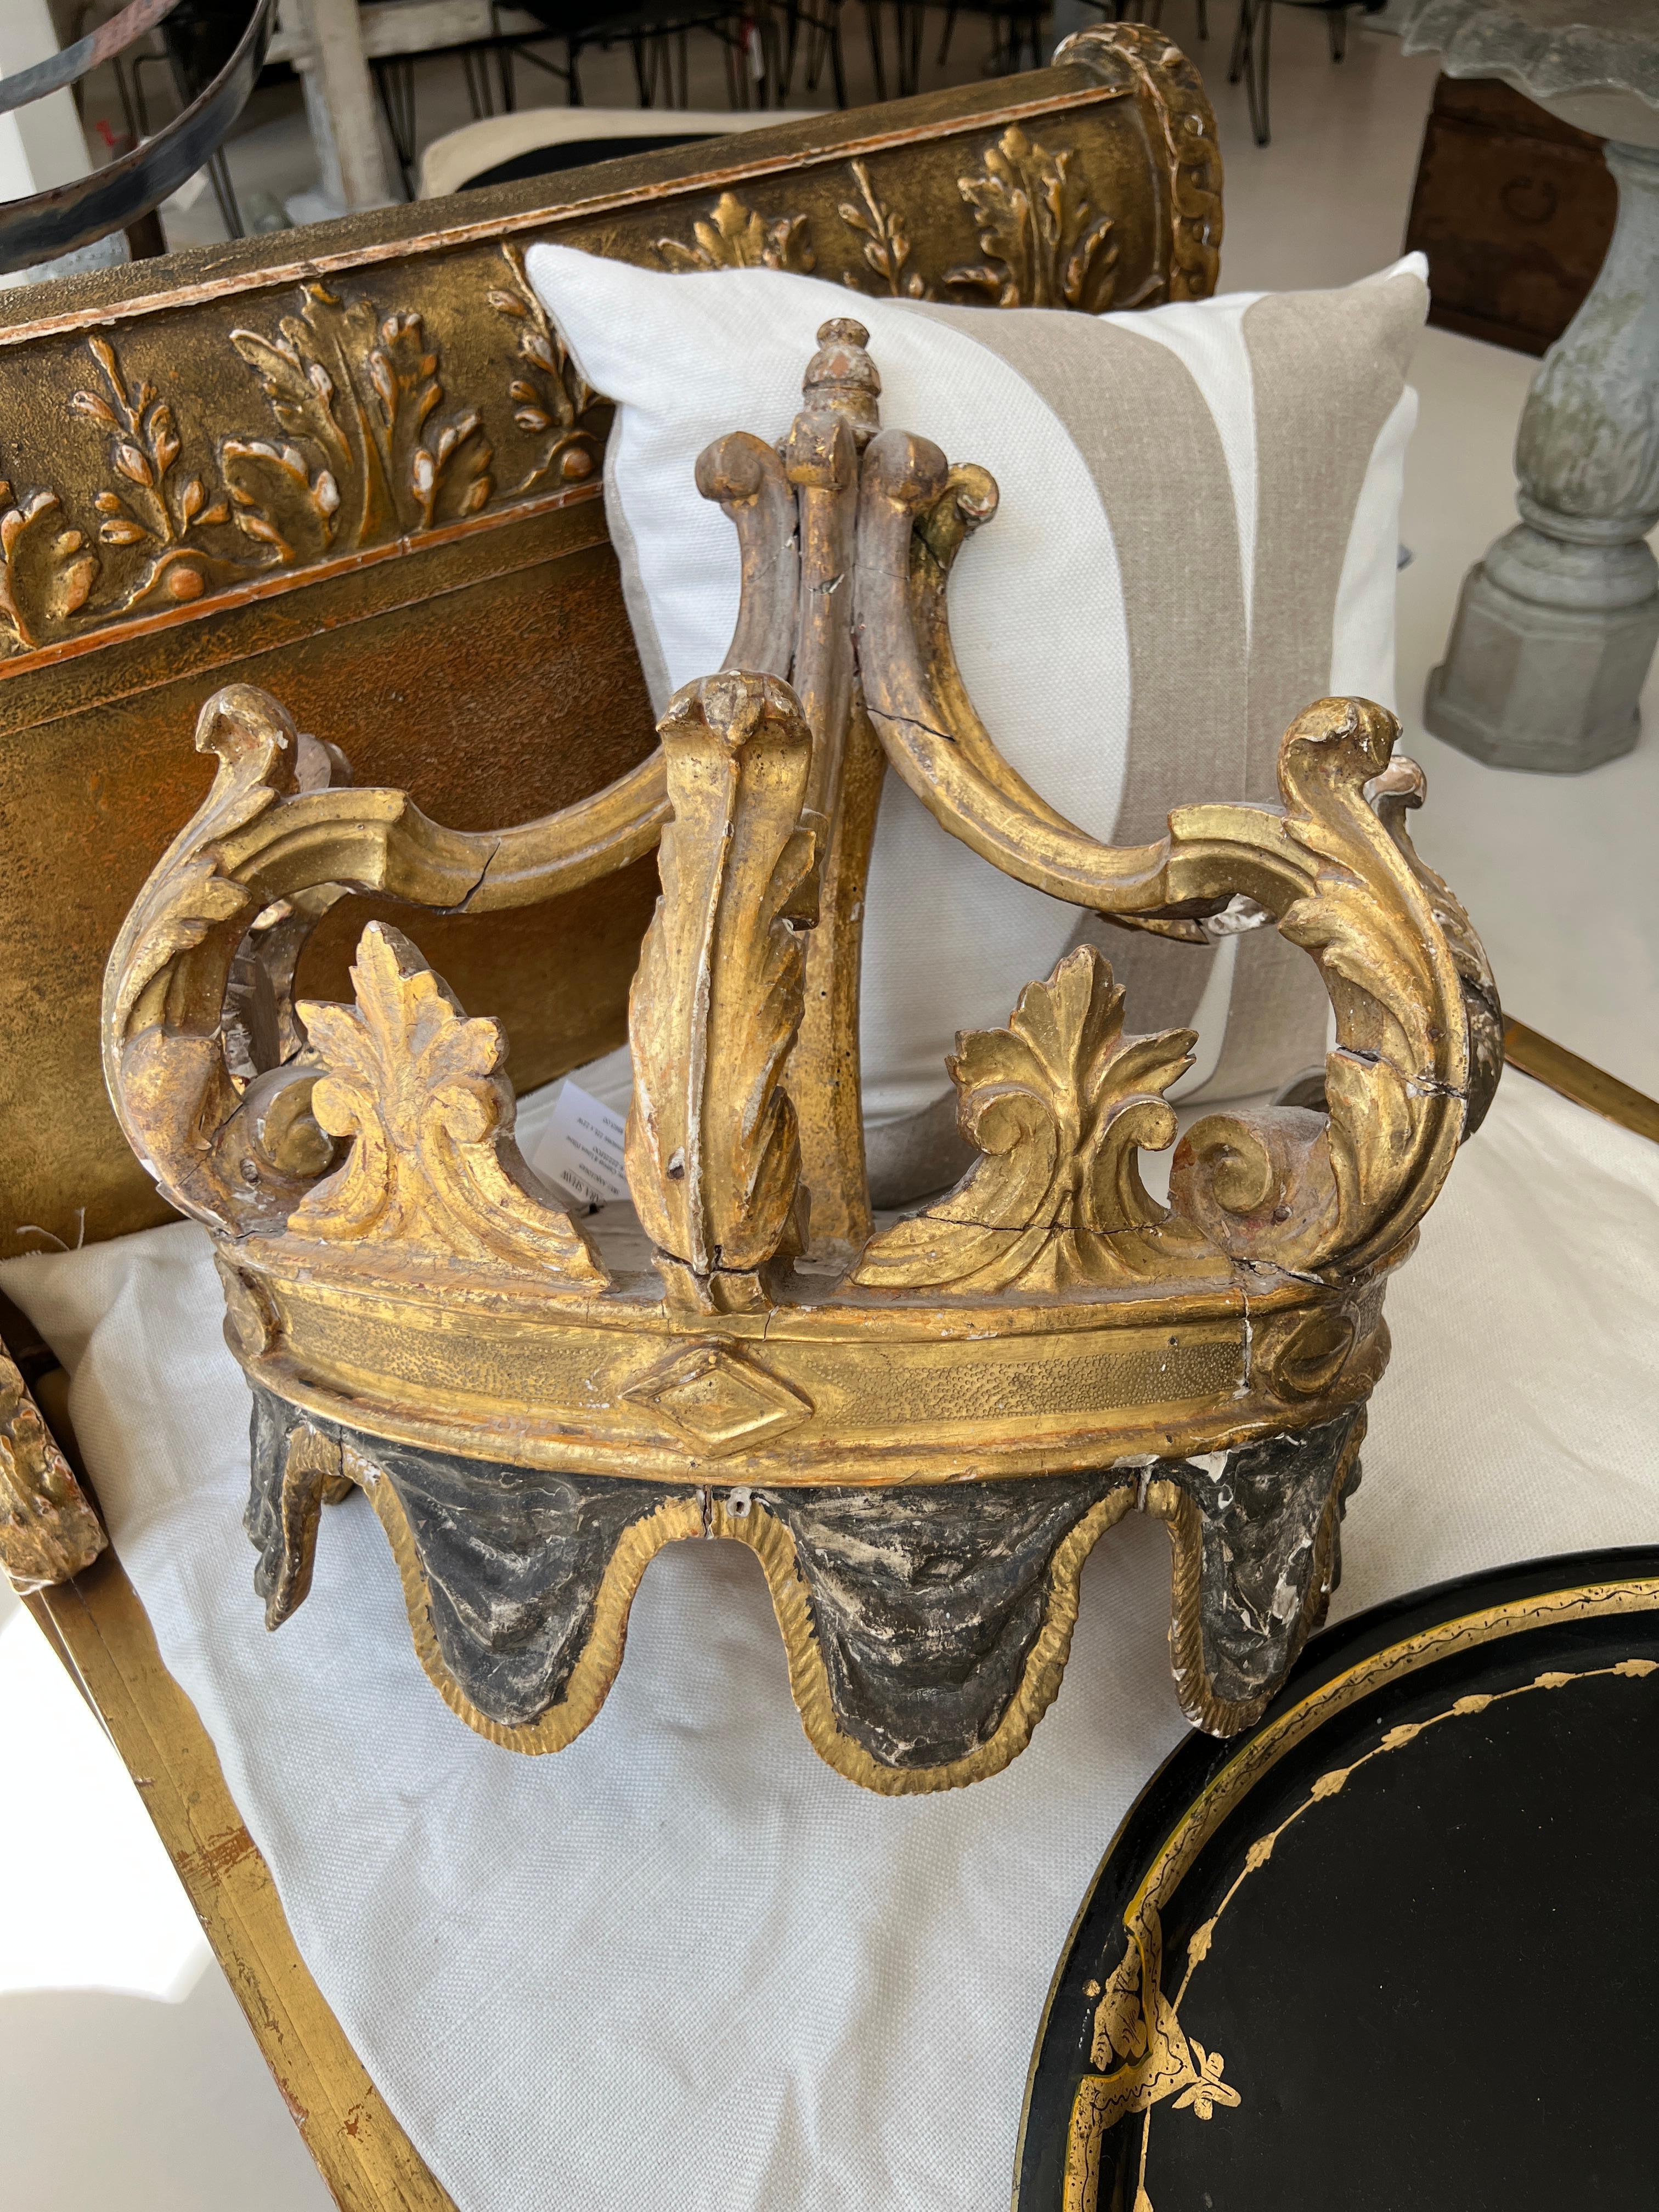 Very rare wooden crown for mounting over a bed with curtains added. This crown has a carved draping effect at the bottom that provides another level of opulence.